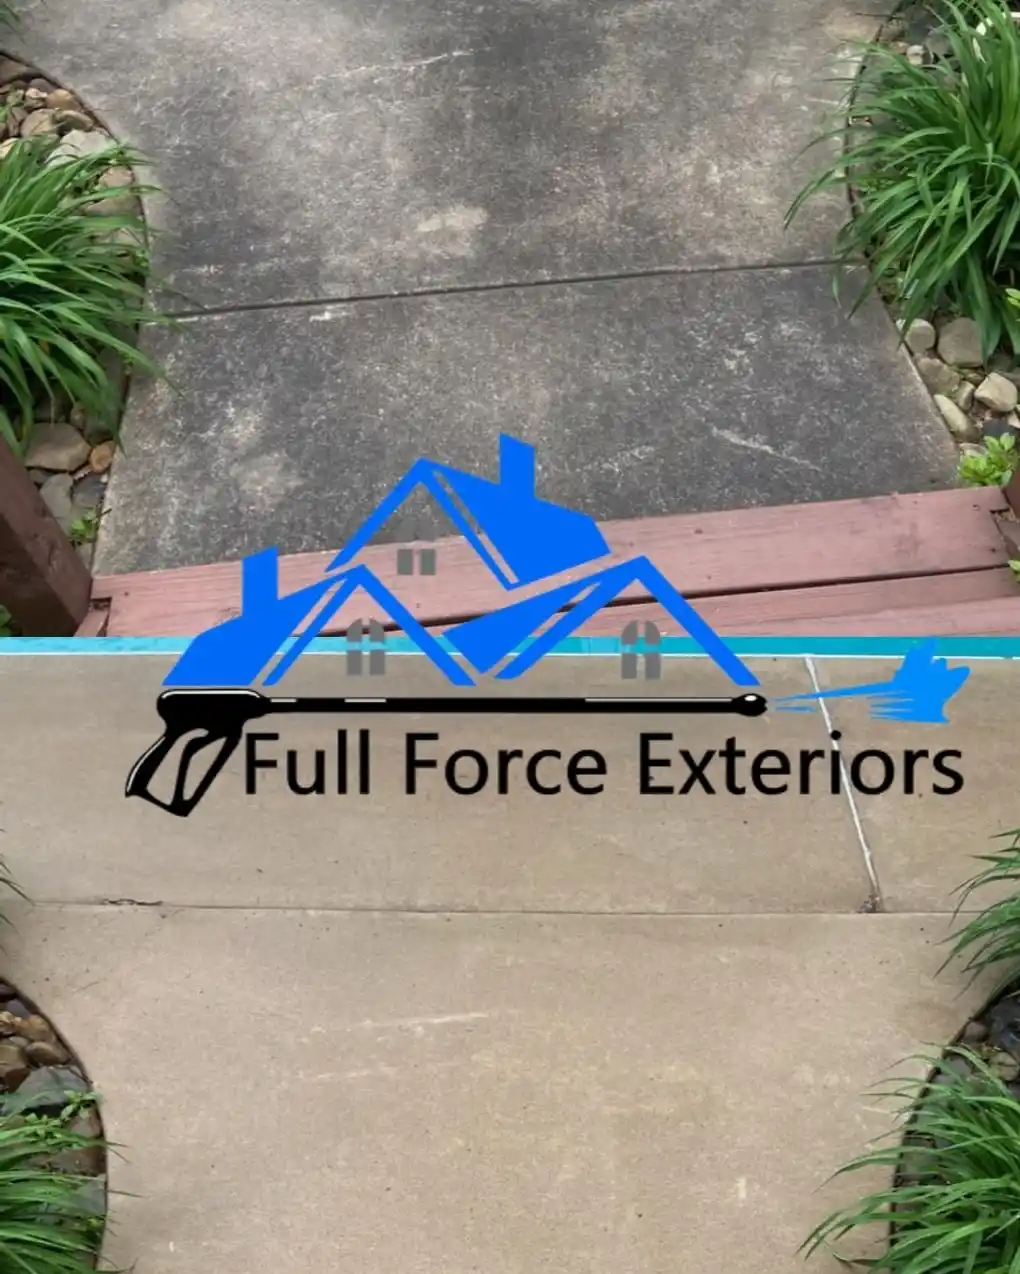 Driveway and Sidewalk Cleaning for Full Force Exteriors in Russellville, AR